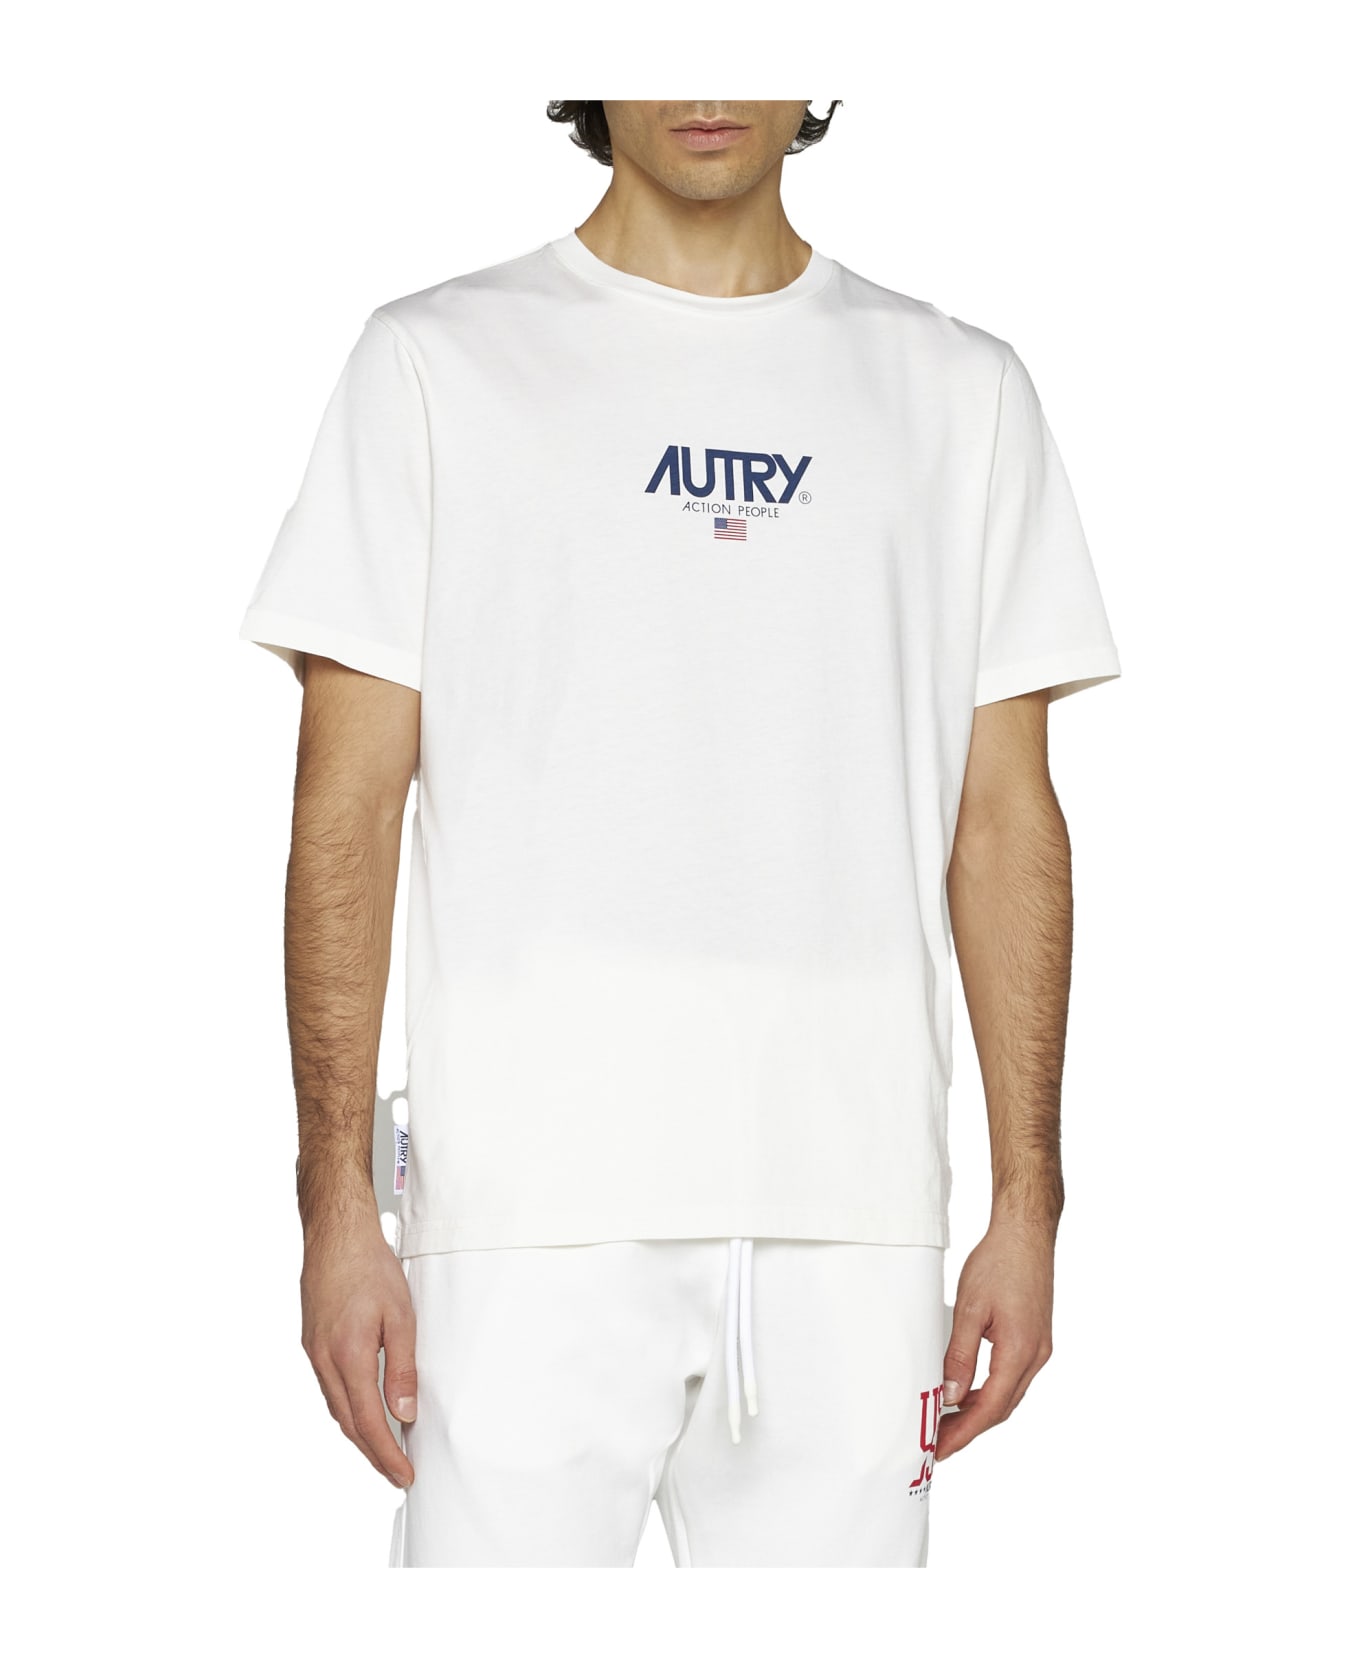 Autry T-Shirt - Action white